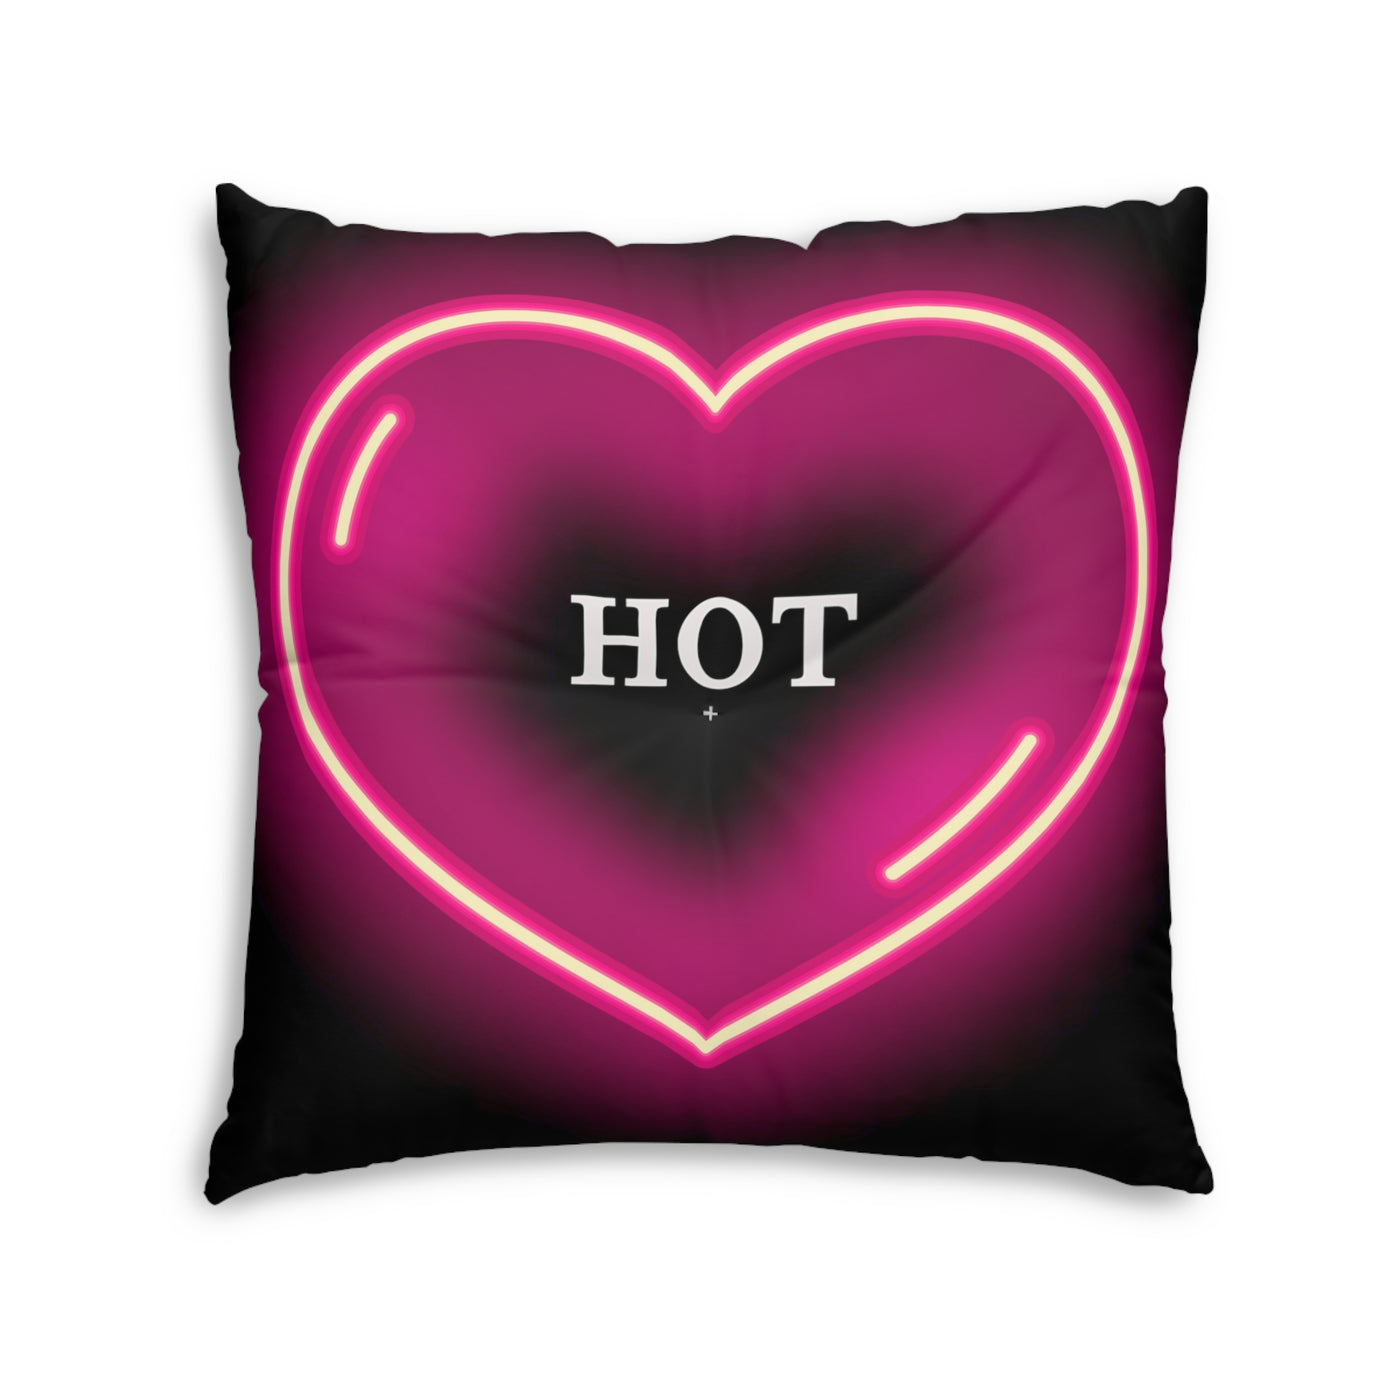 NEON Hot or Cold Tufted Floor Pillow, Square 30x30